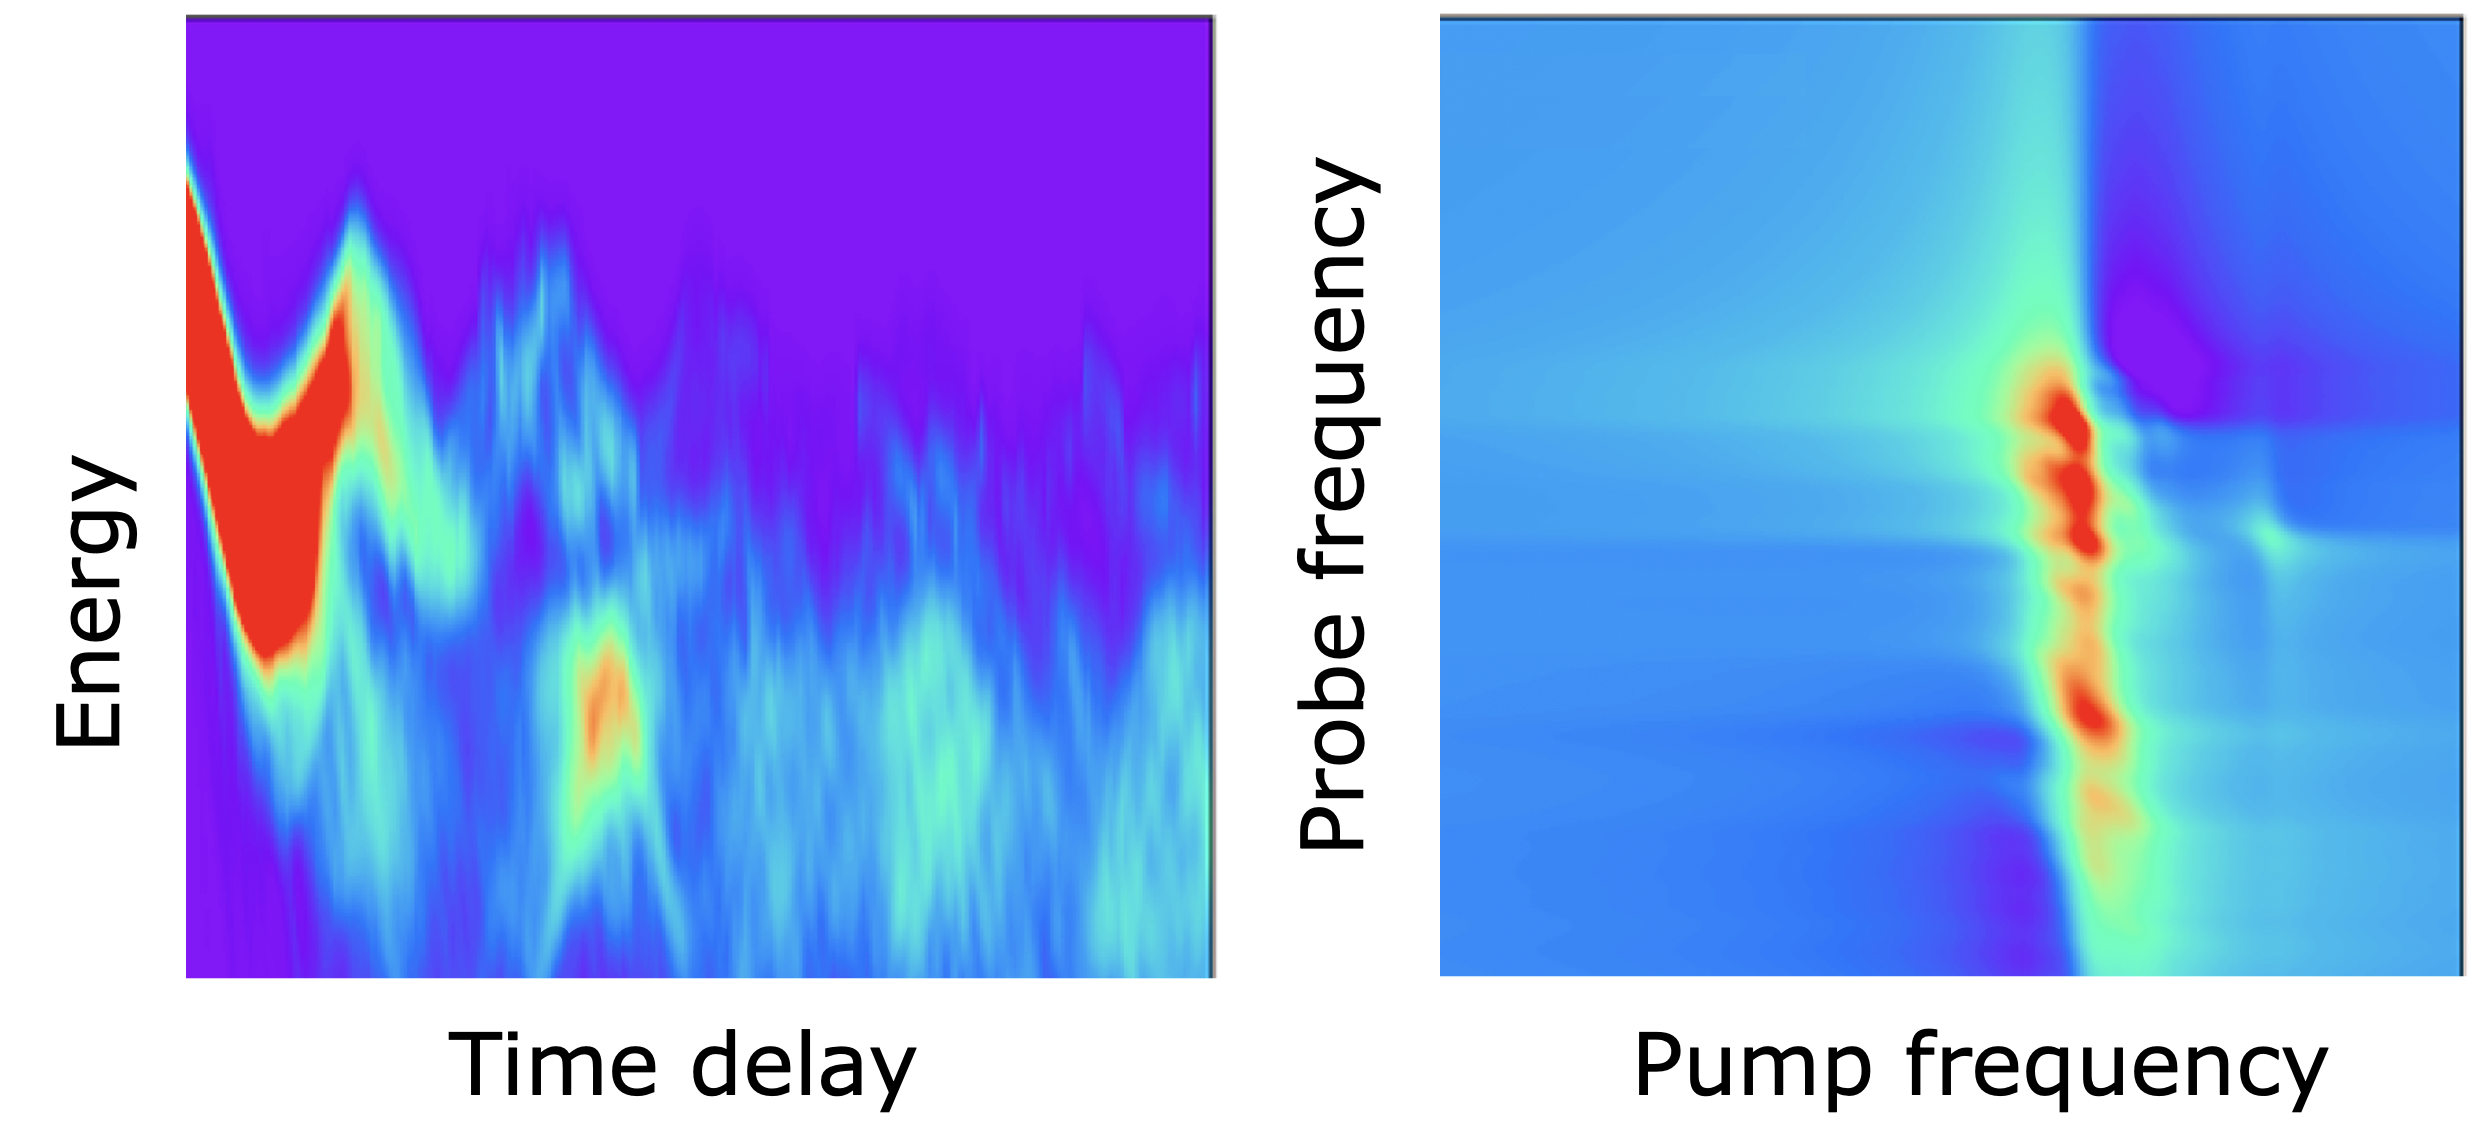 Artificial-Intelligence-Enhanced On-the-Fly Simulation of Nonlinear Time-Resolved Spectra